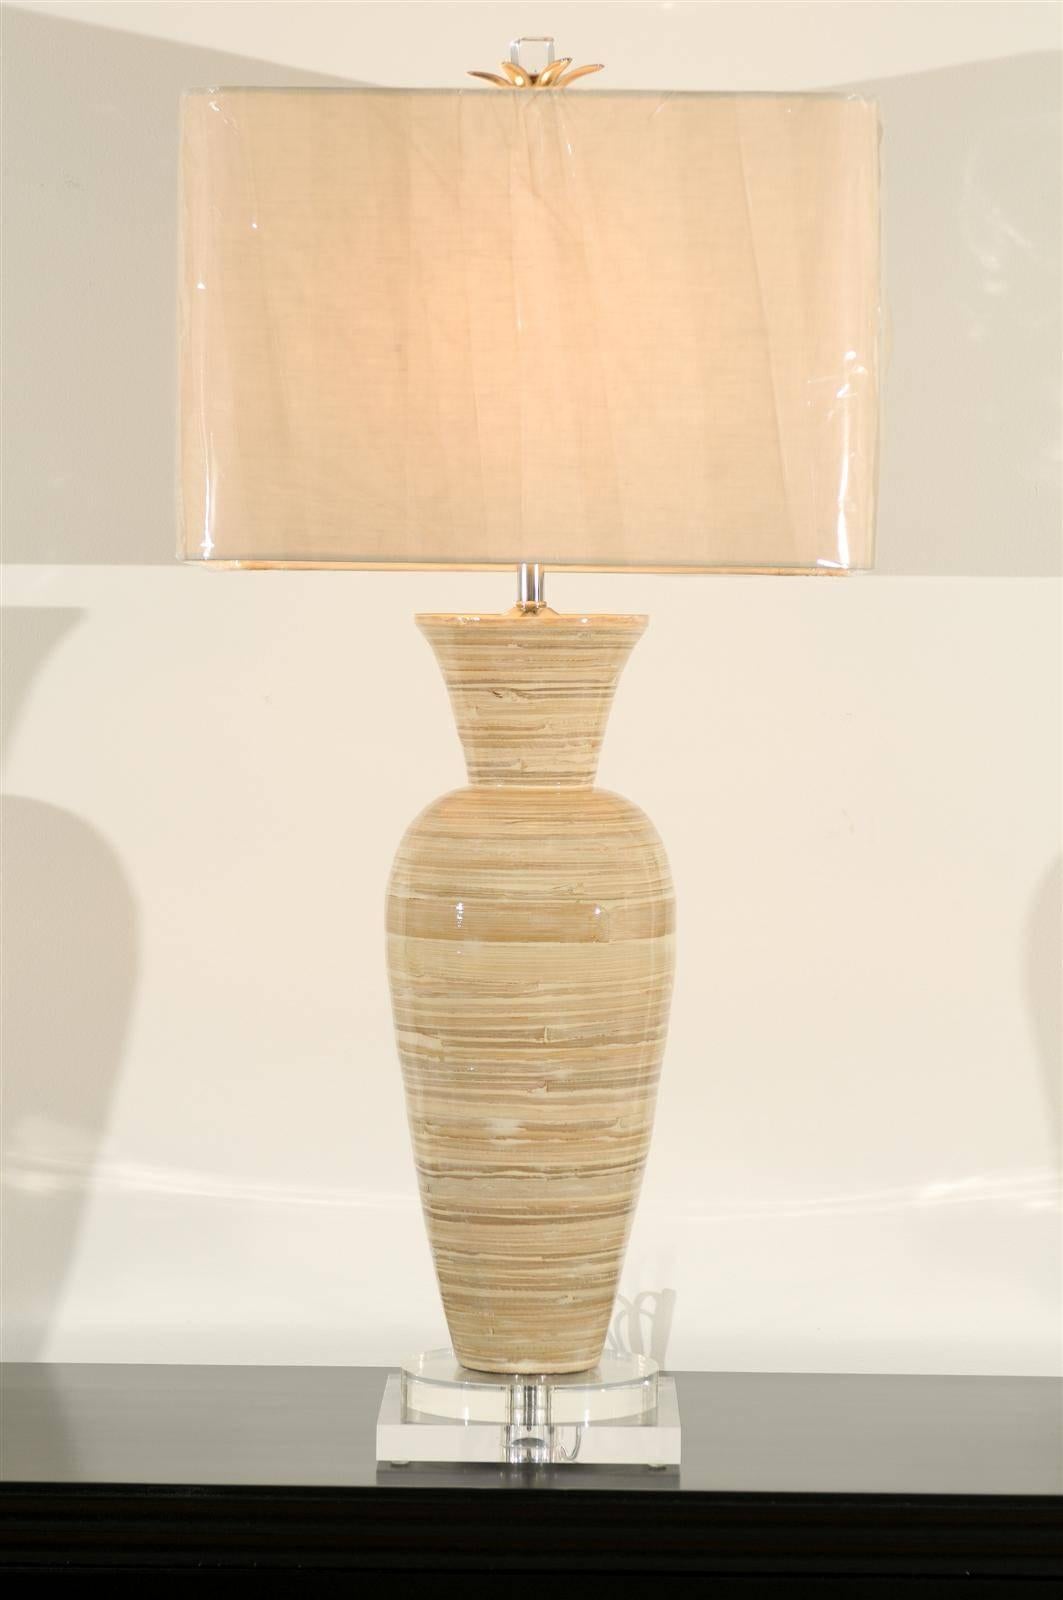 An exquisite pair of bamboo vases as custom-made lamps. Beautiful shape, scale, texture and range of color. Exceptional weight and craftsmanship. Stunning jewelry! Excellent restored condition. Wired using clear cord; new nickel three-way sockets